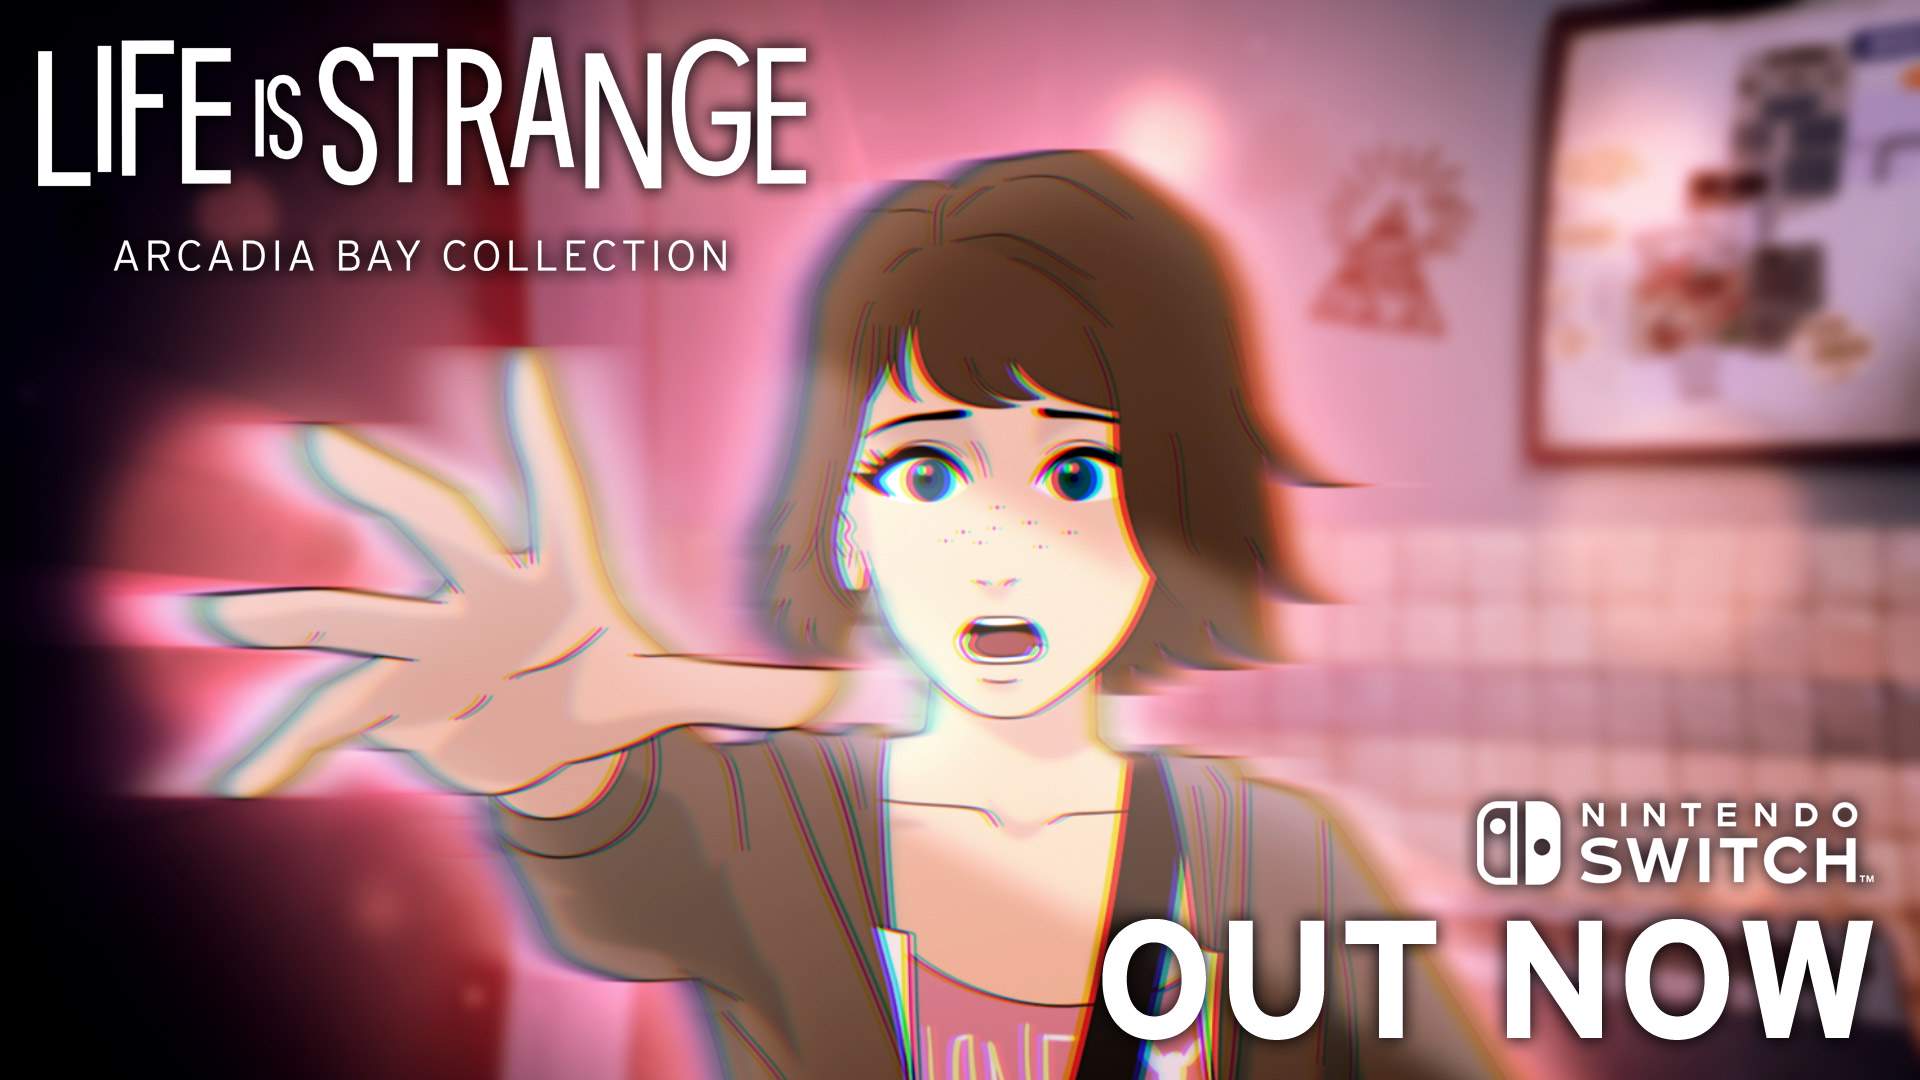 Max Caulfield, rendered in a 2D animated style, reaches out to use her power to rewind time.